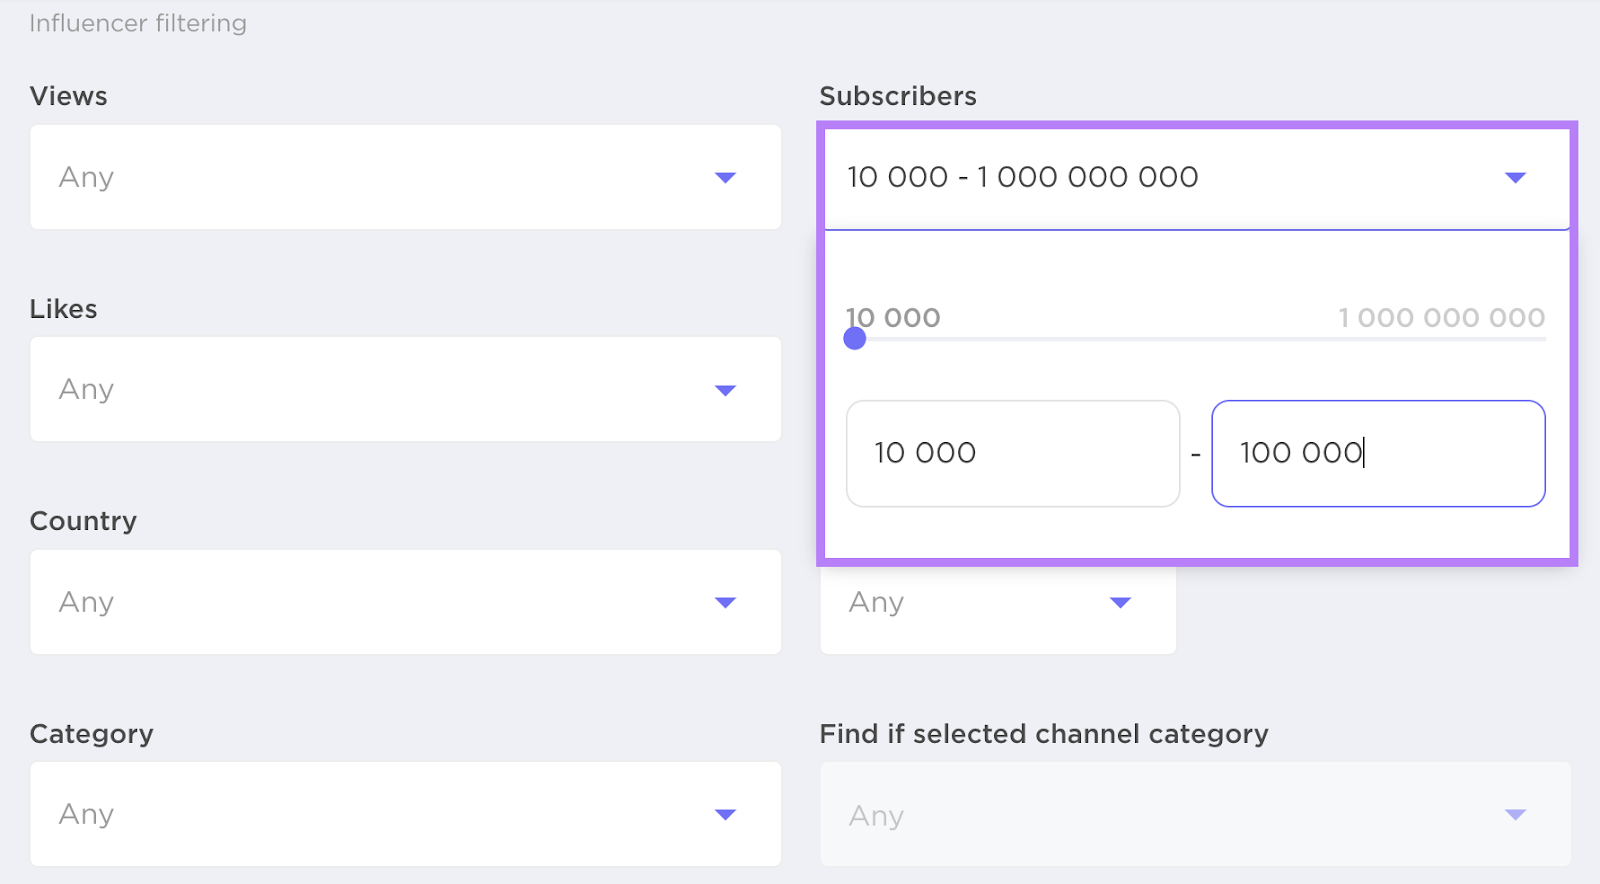 "Influencer filtering" tab in Influencer Analytics